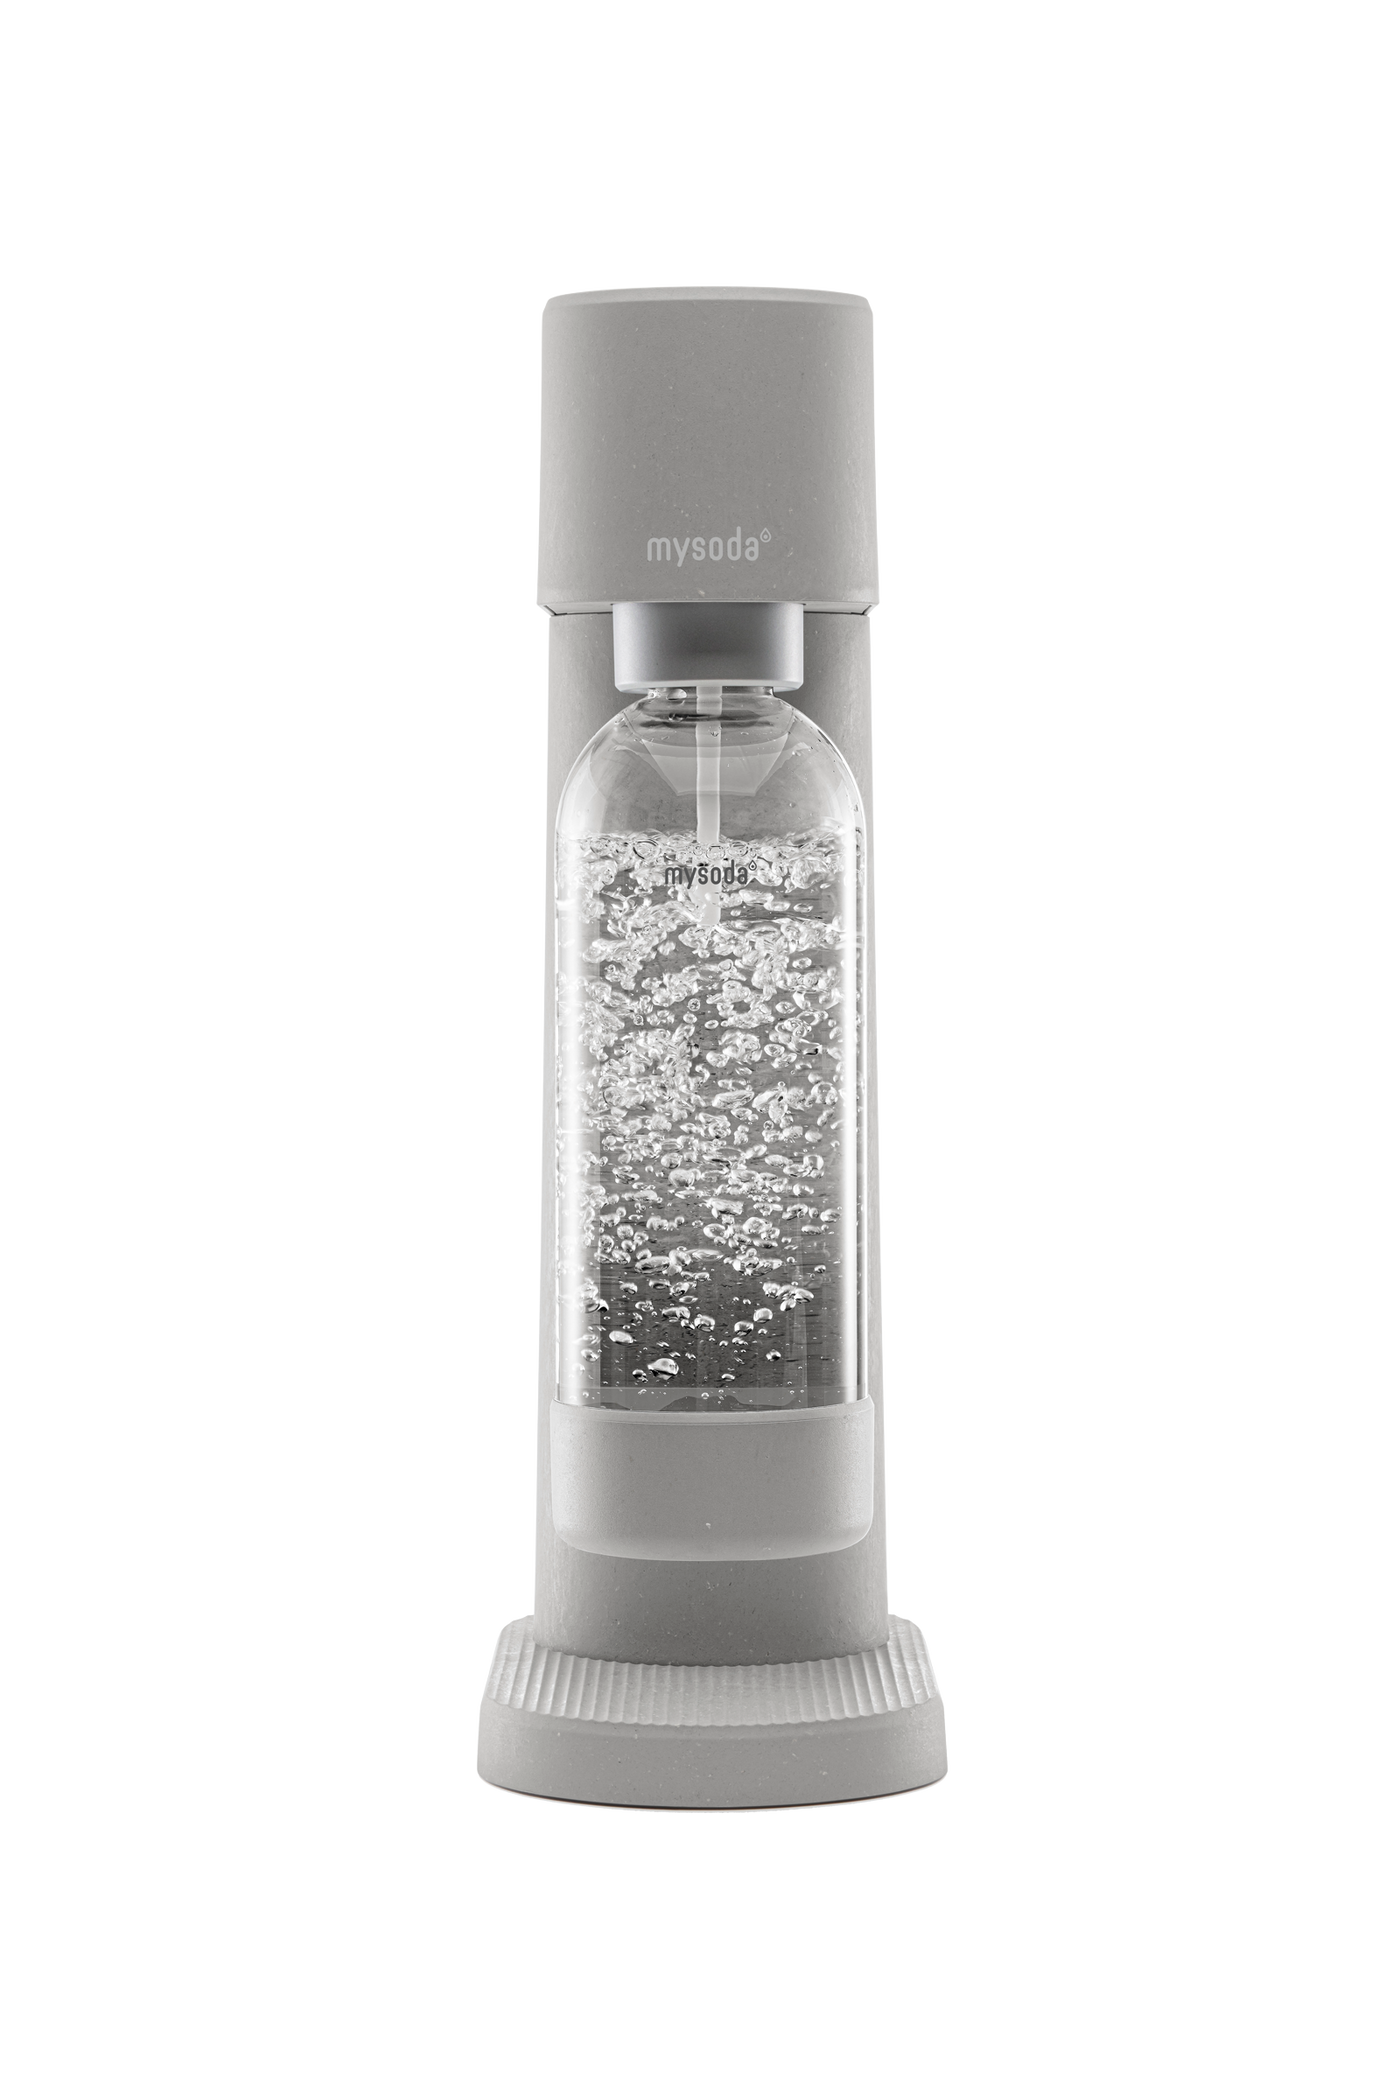 Gray Mysoda Woody sparkling water maker viewed from the front